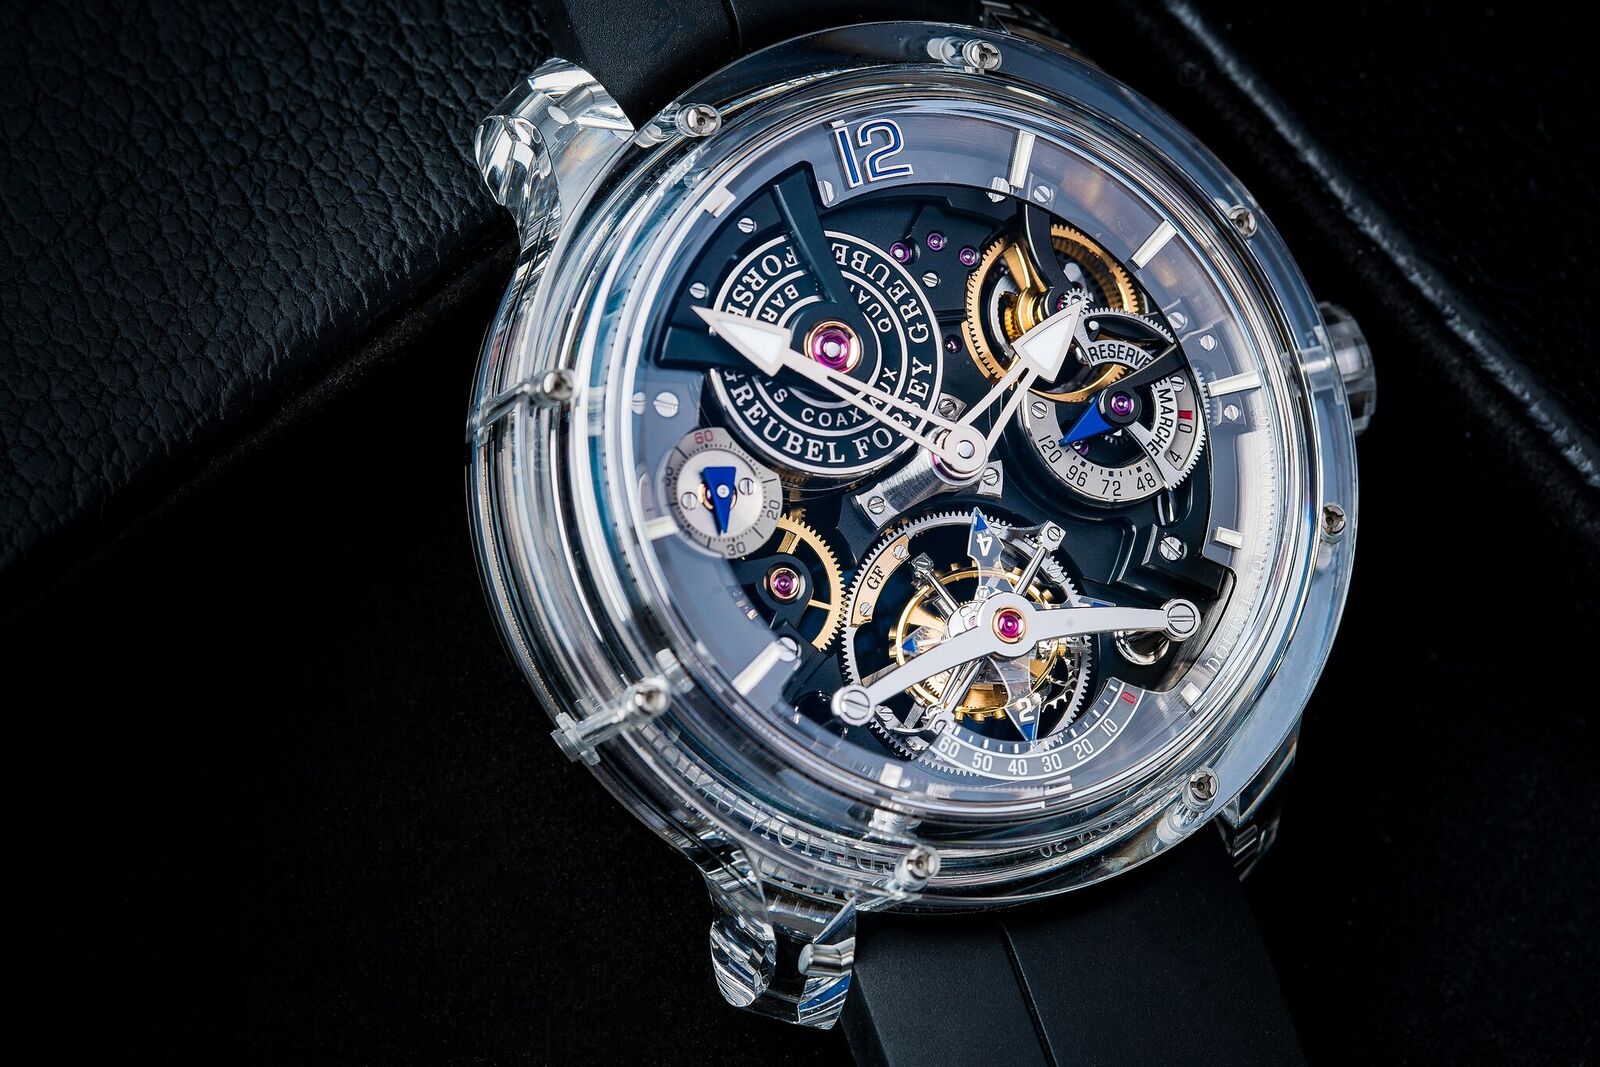 Up Close and Personal with the Greubel Forsey Double Tourbillon 30° Technique Sapphire